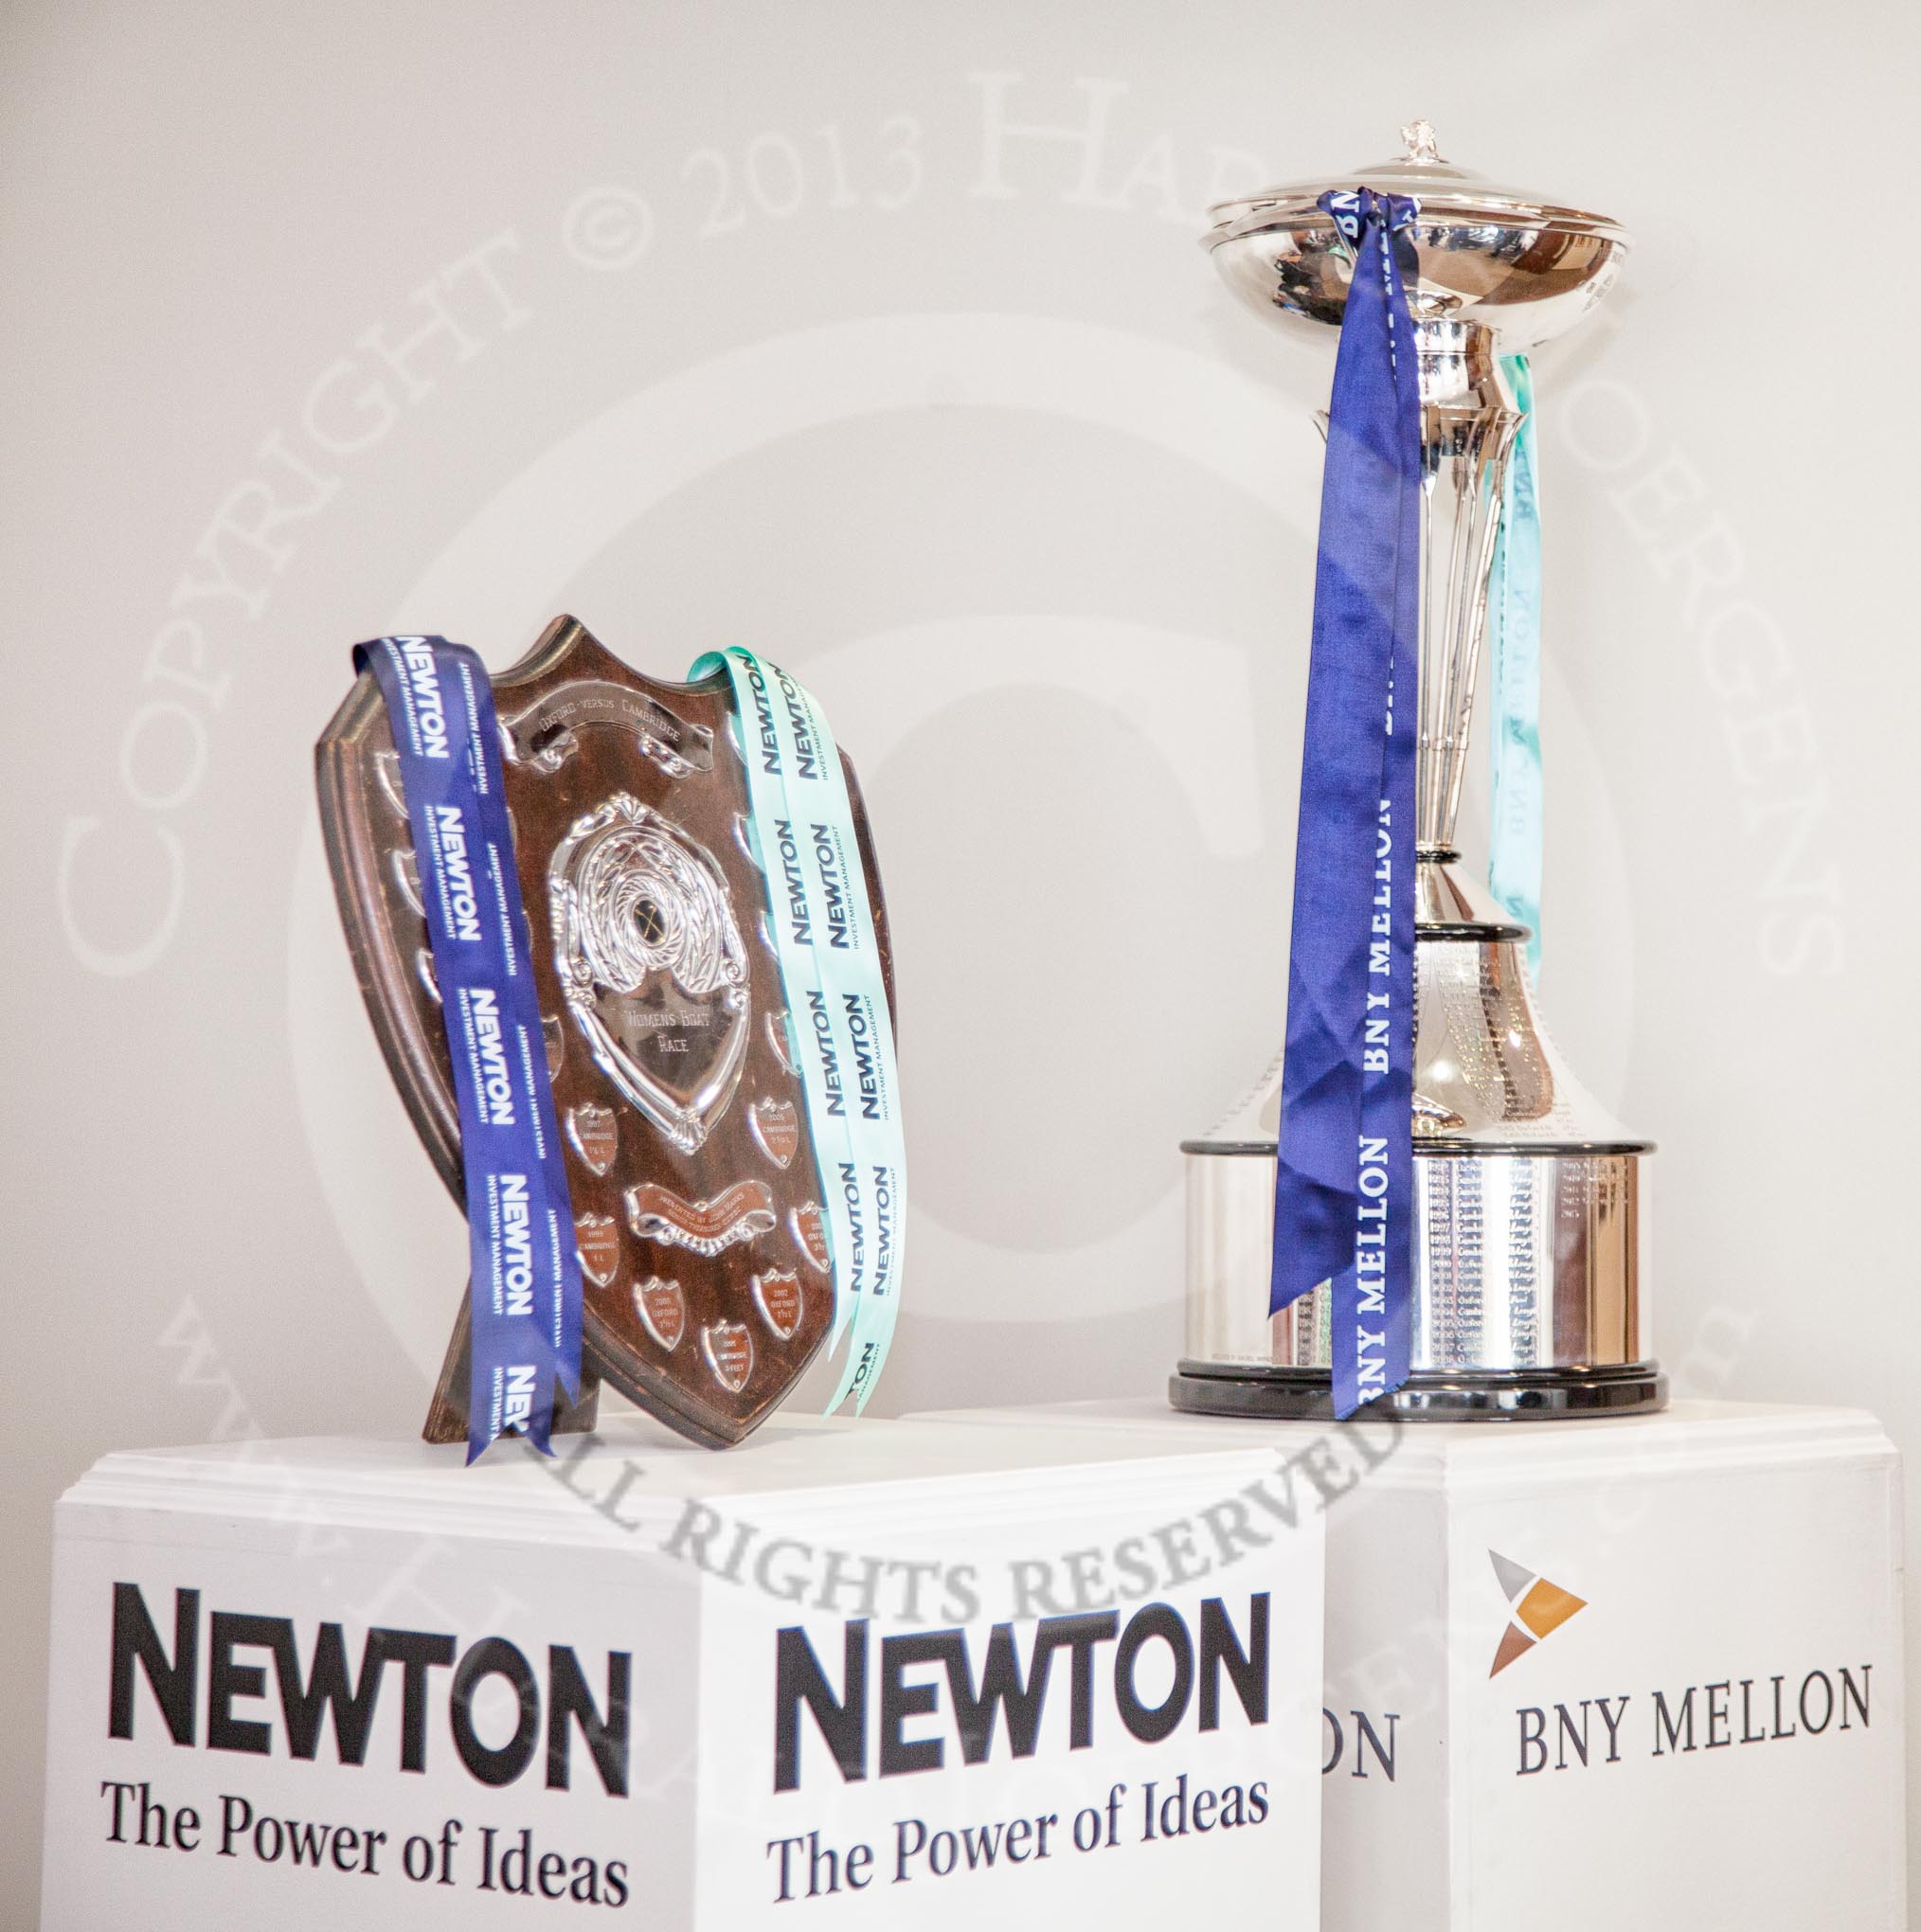 The Boat Race season 2013 - Crew Announcement and Weigh In: The trophies - on the left for the Newton Women's Boat Race, on the right for the men's BNY Mellon Boat Race..
BNY Mellon Centre,
London EC4V 4LA,

United Kingdom,
on 04 March 2013 at 11:18, image #117